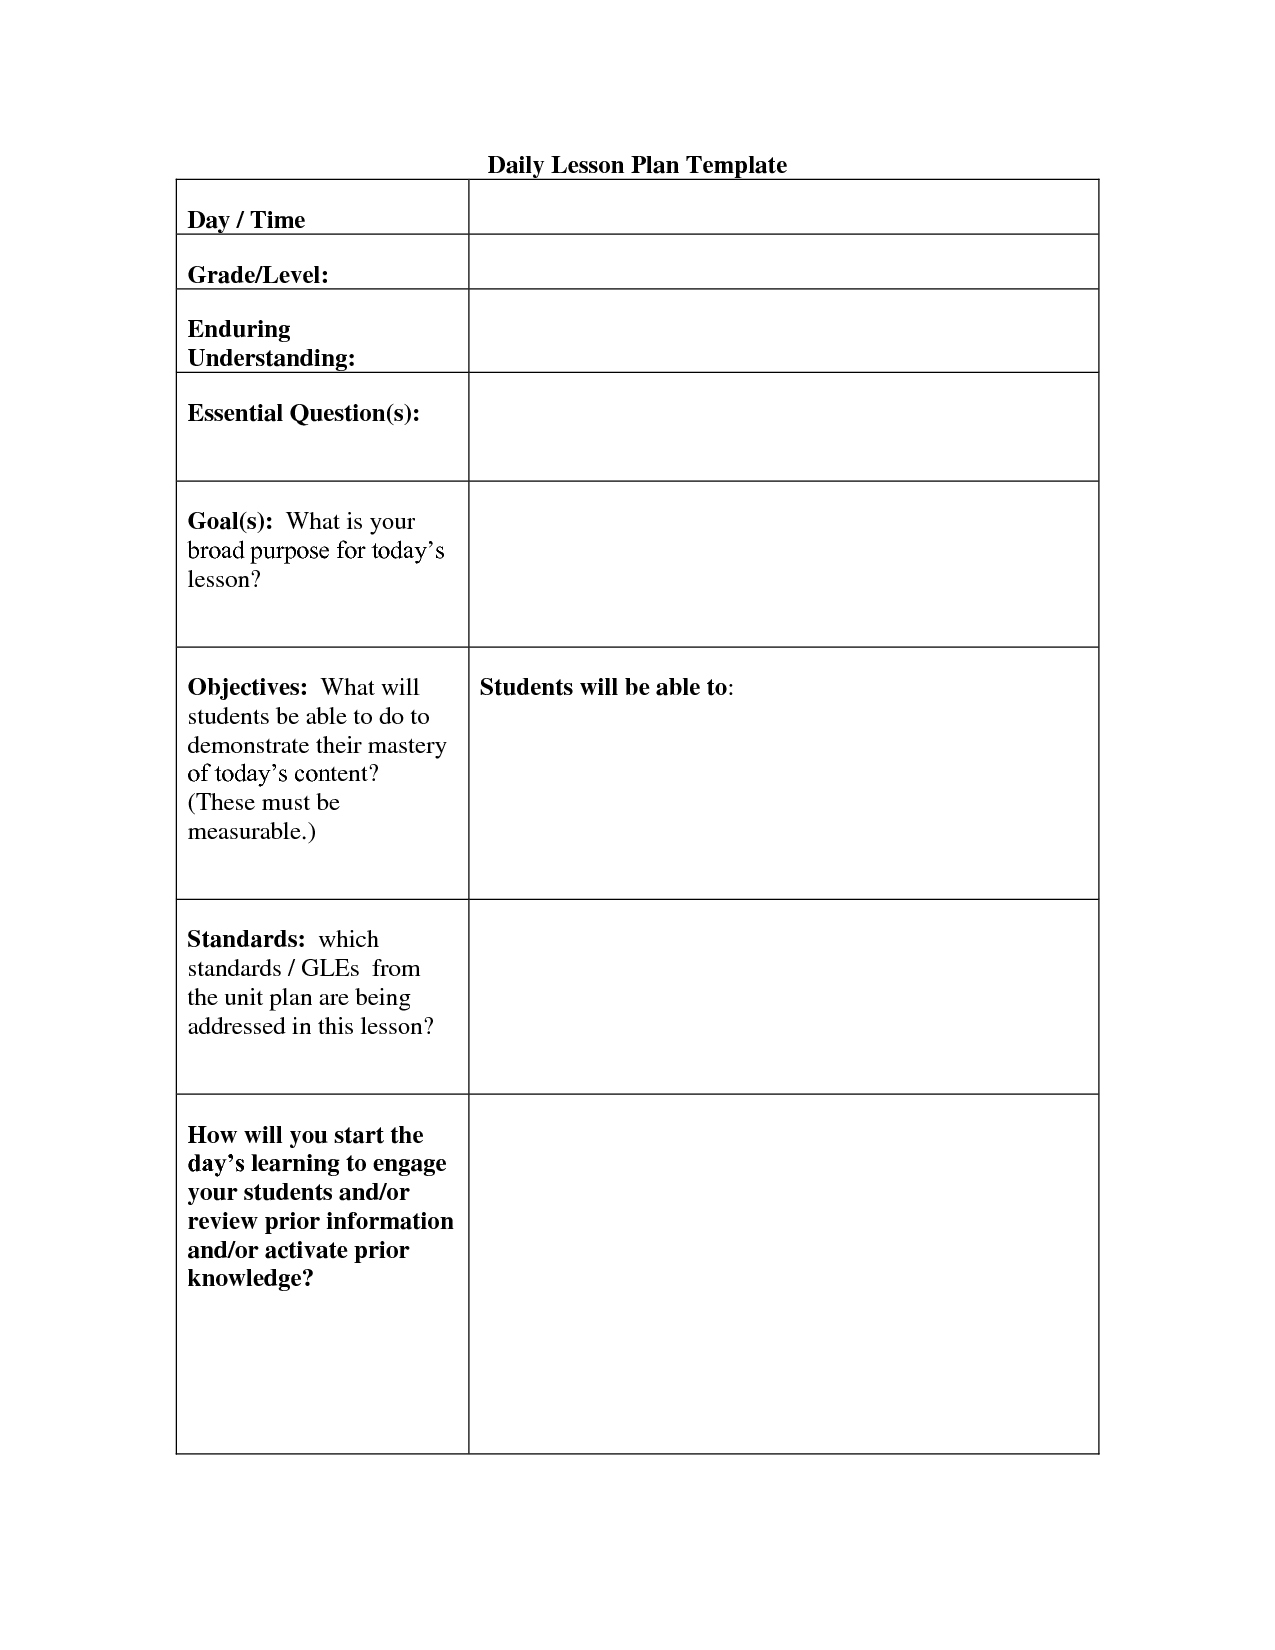 daily-lesson-plan-template-fotolip